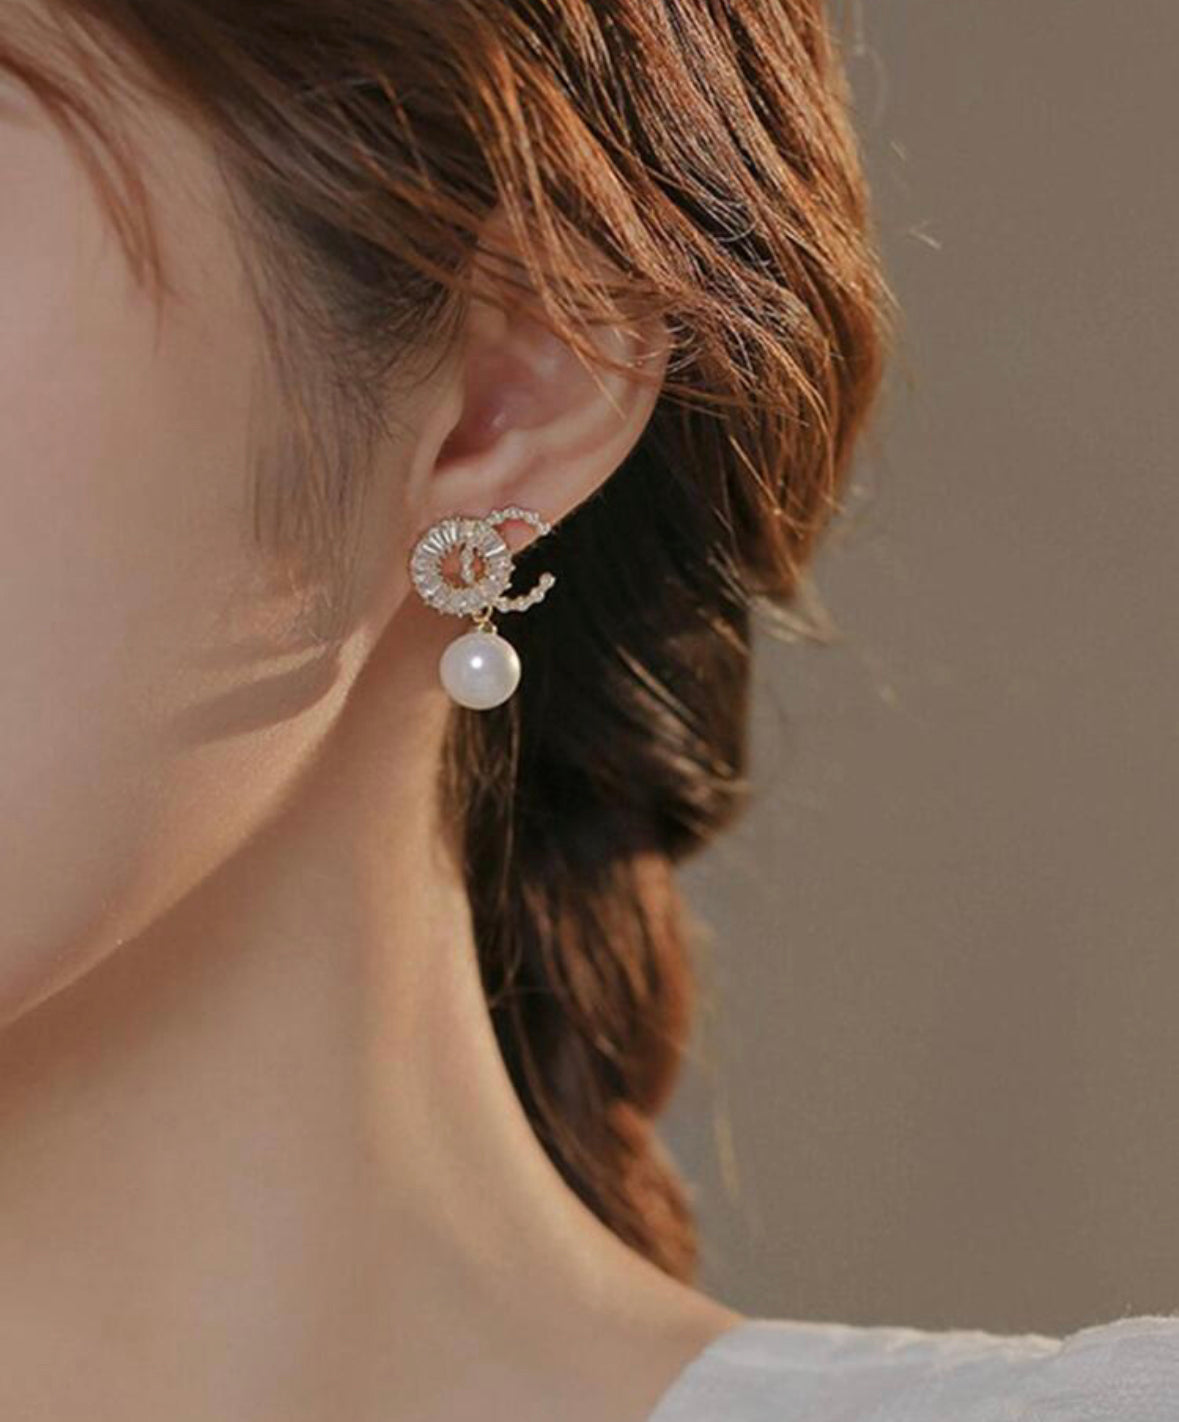 Exquisite and charming pearl cubic zirconia earrings